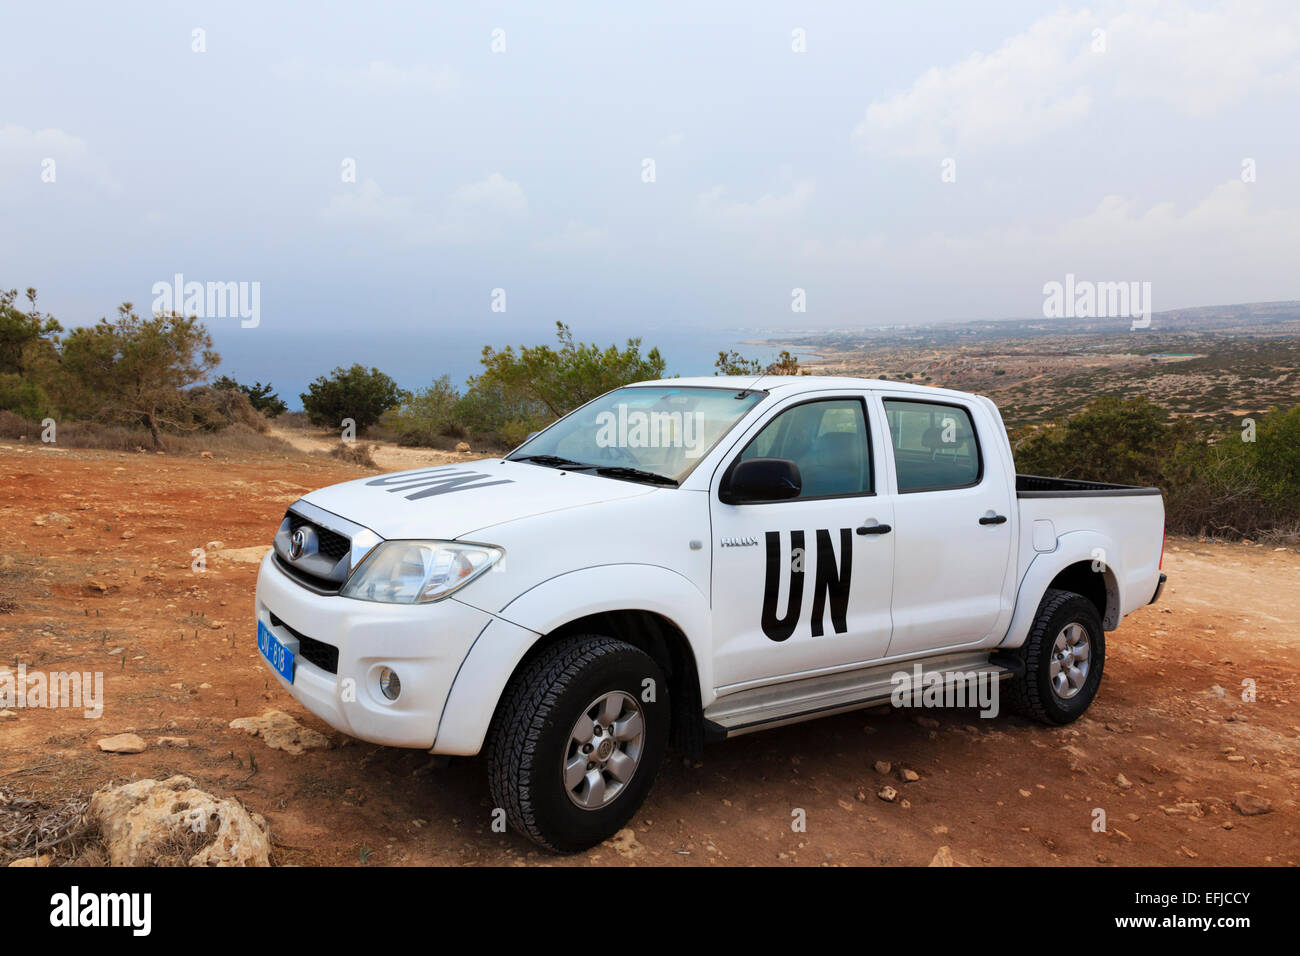 Toyota of the United Nations Peace keeping force based in Cyprus at Cape Greco Stock Photo